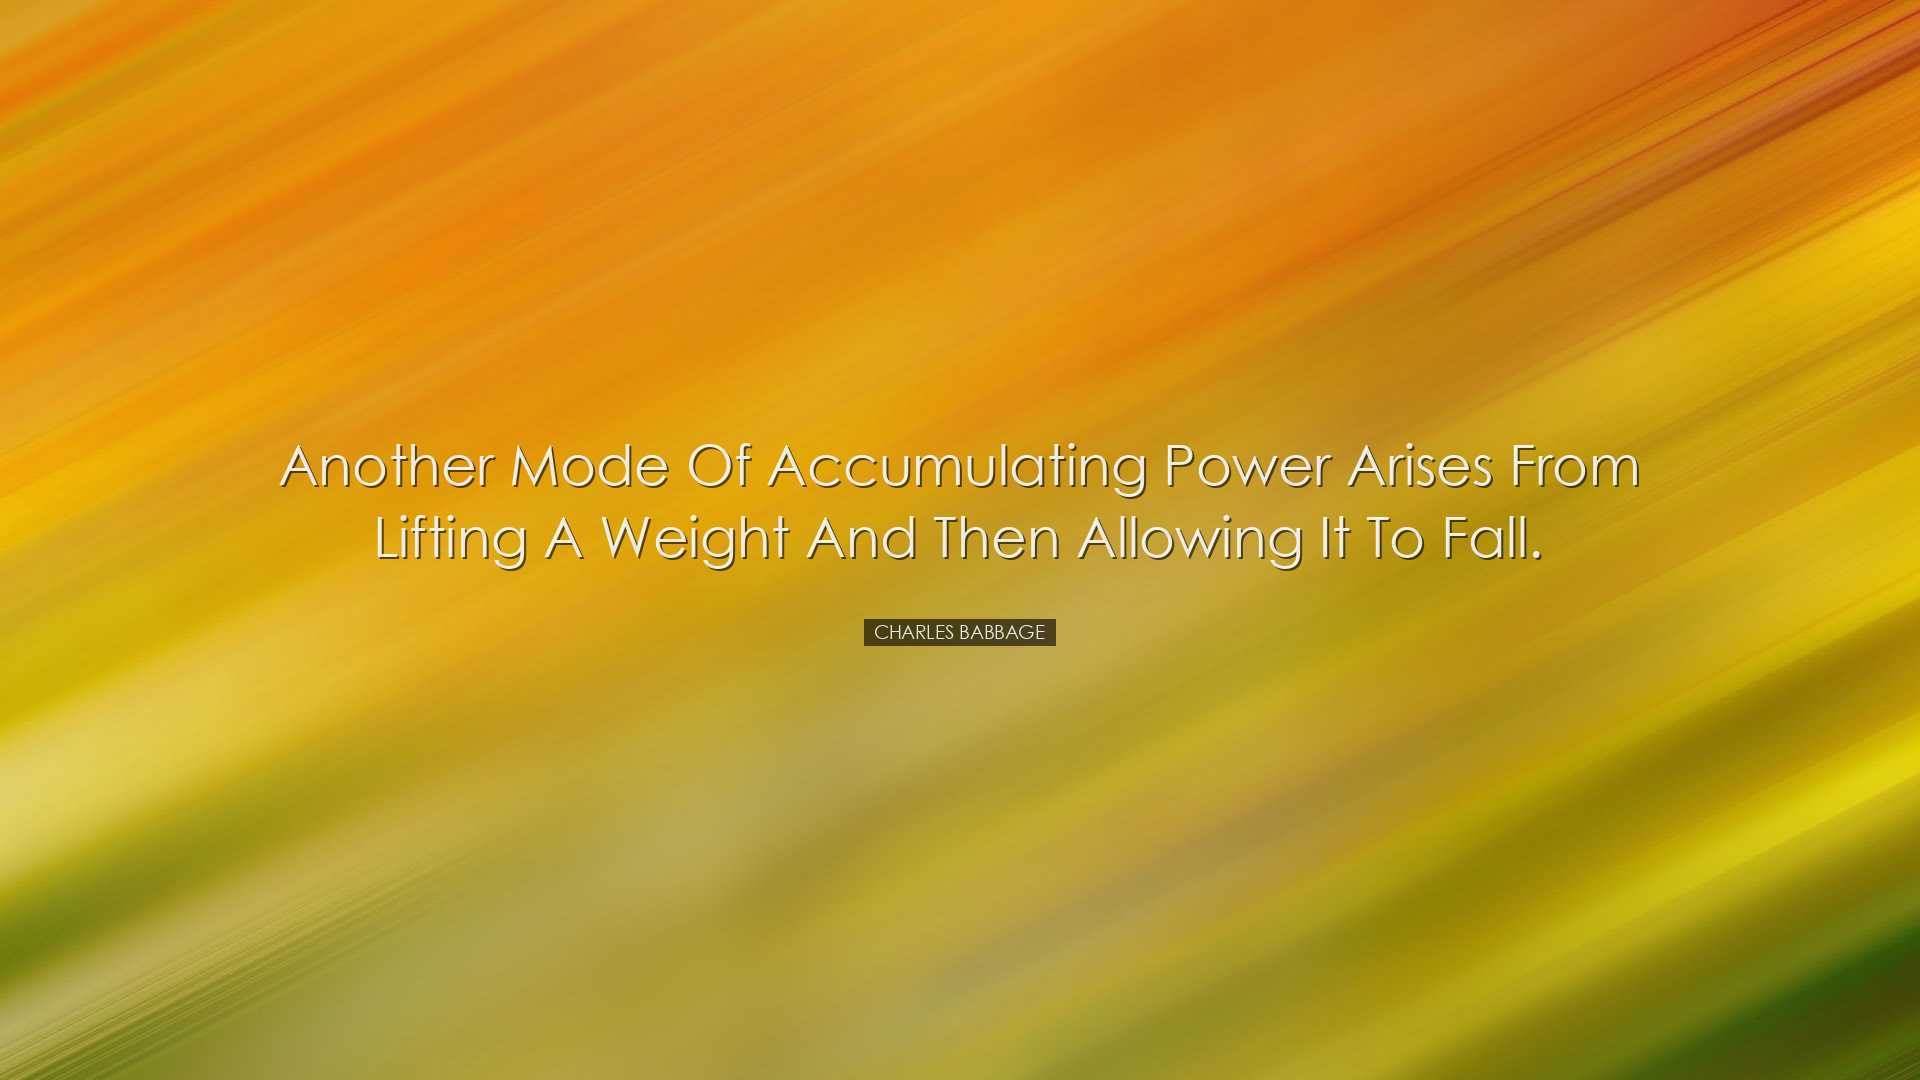 Another mode of accumulating power arises from lifting a weight an